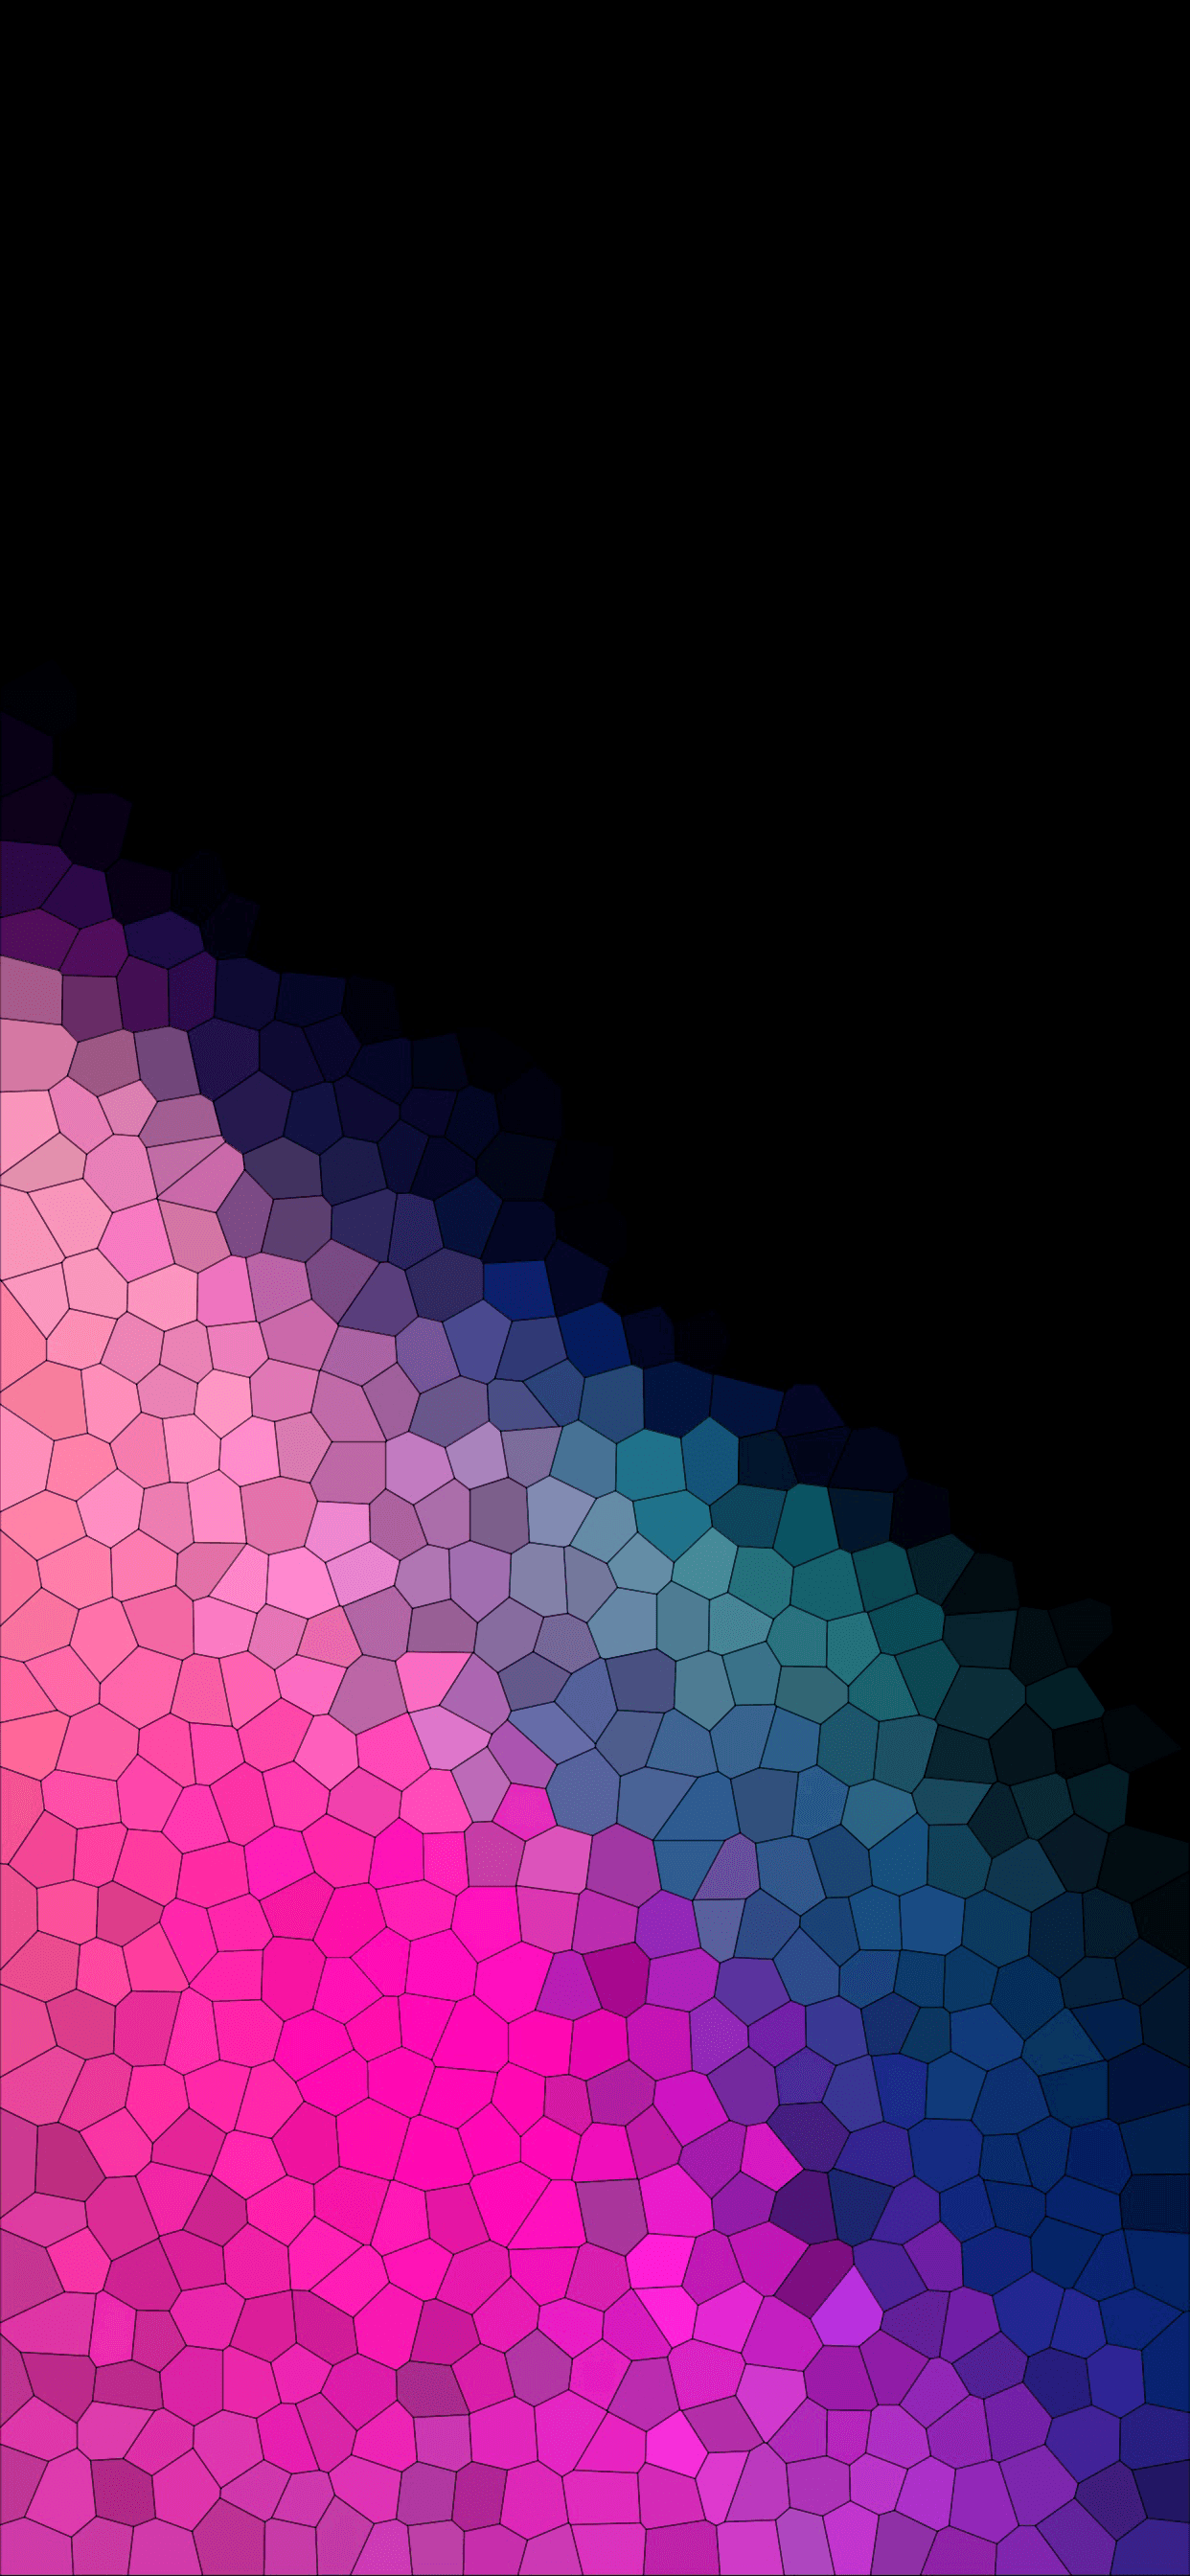 True black with colorful gradients wallpaper